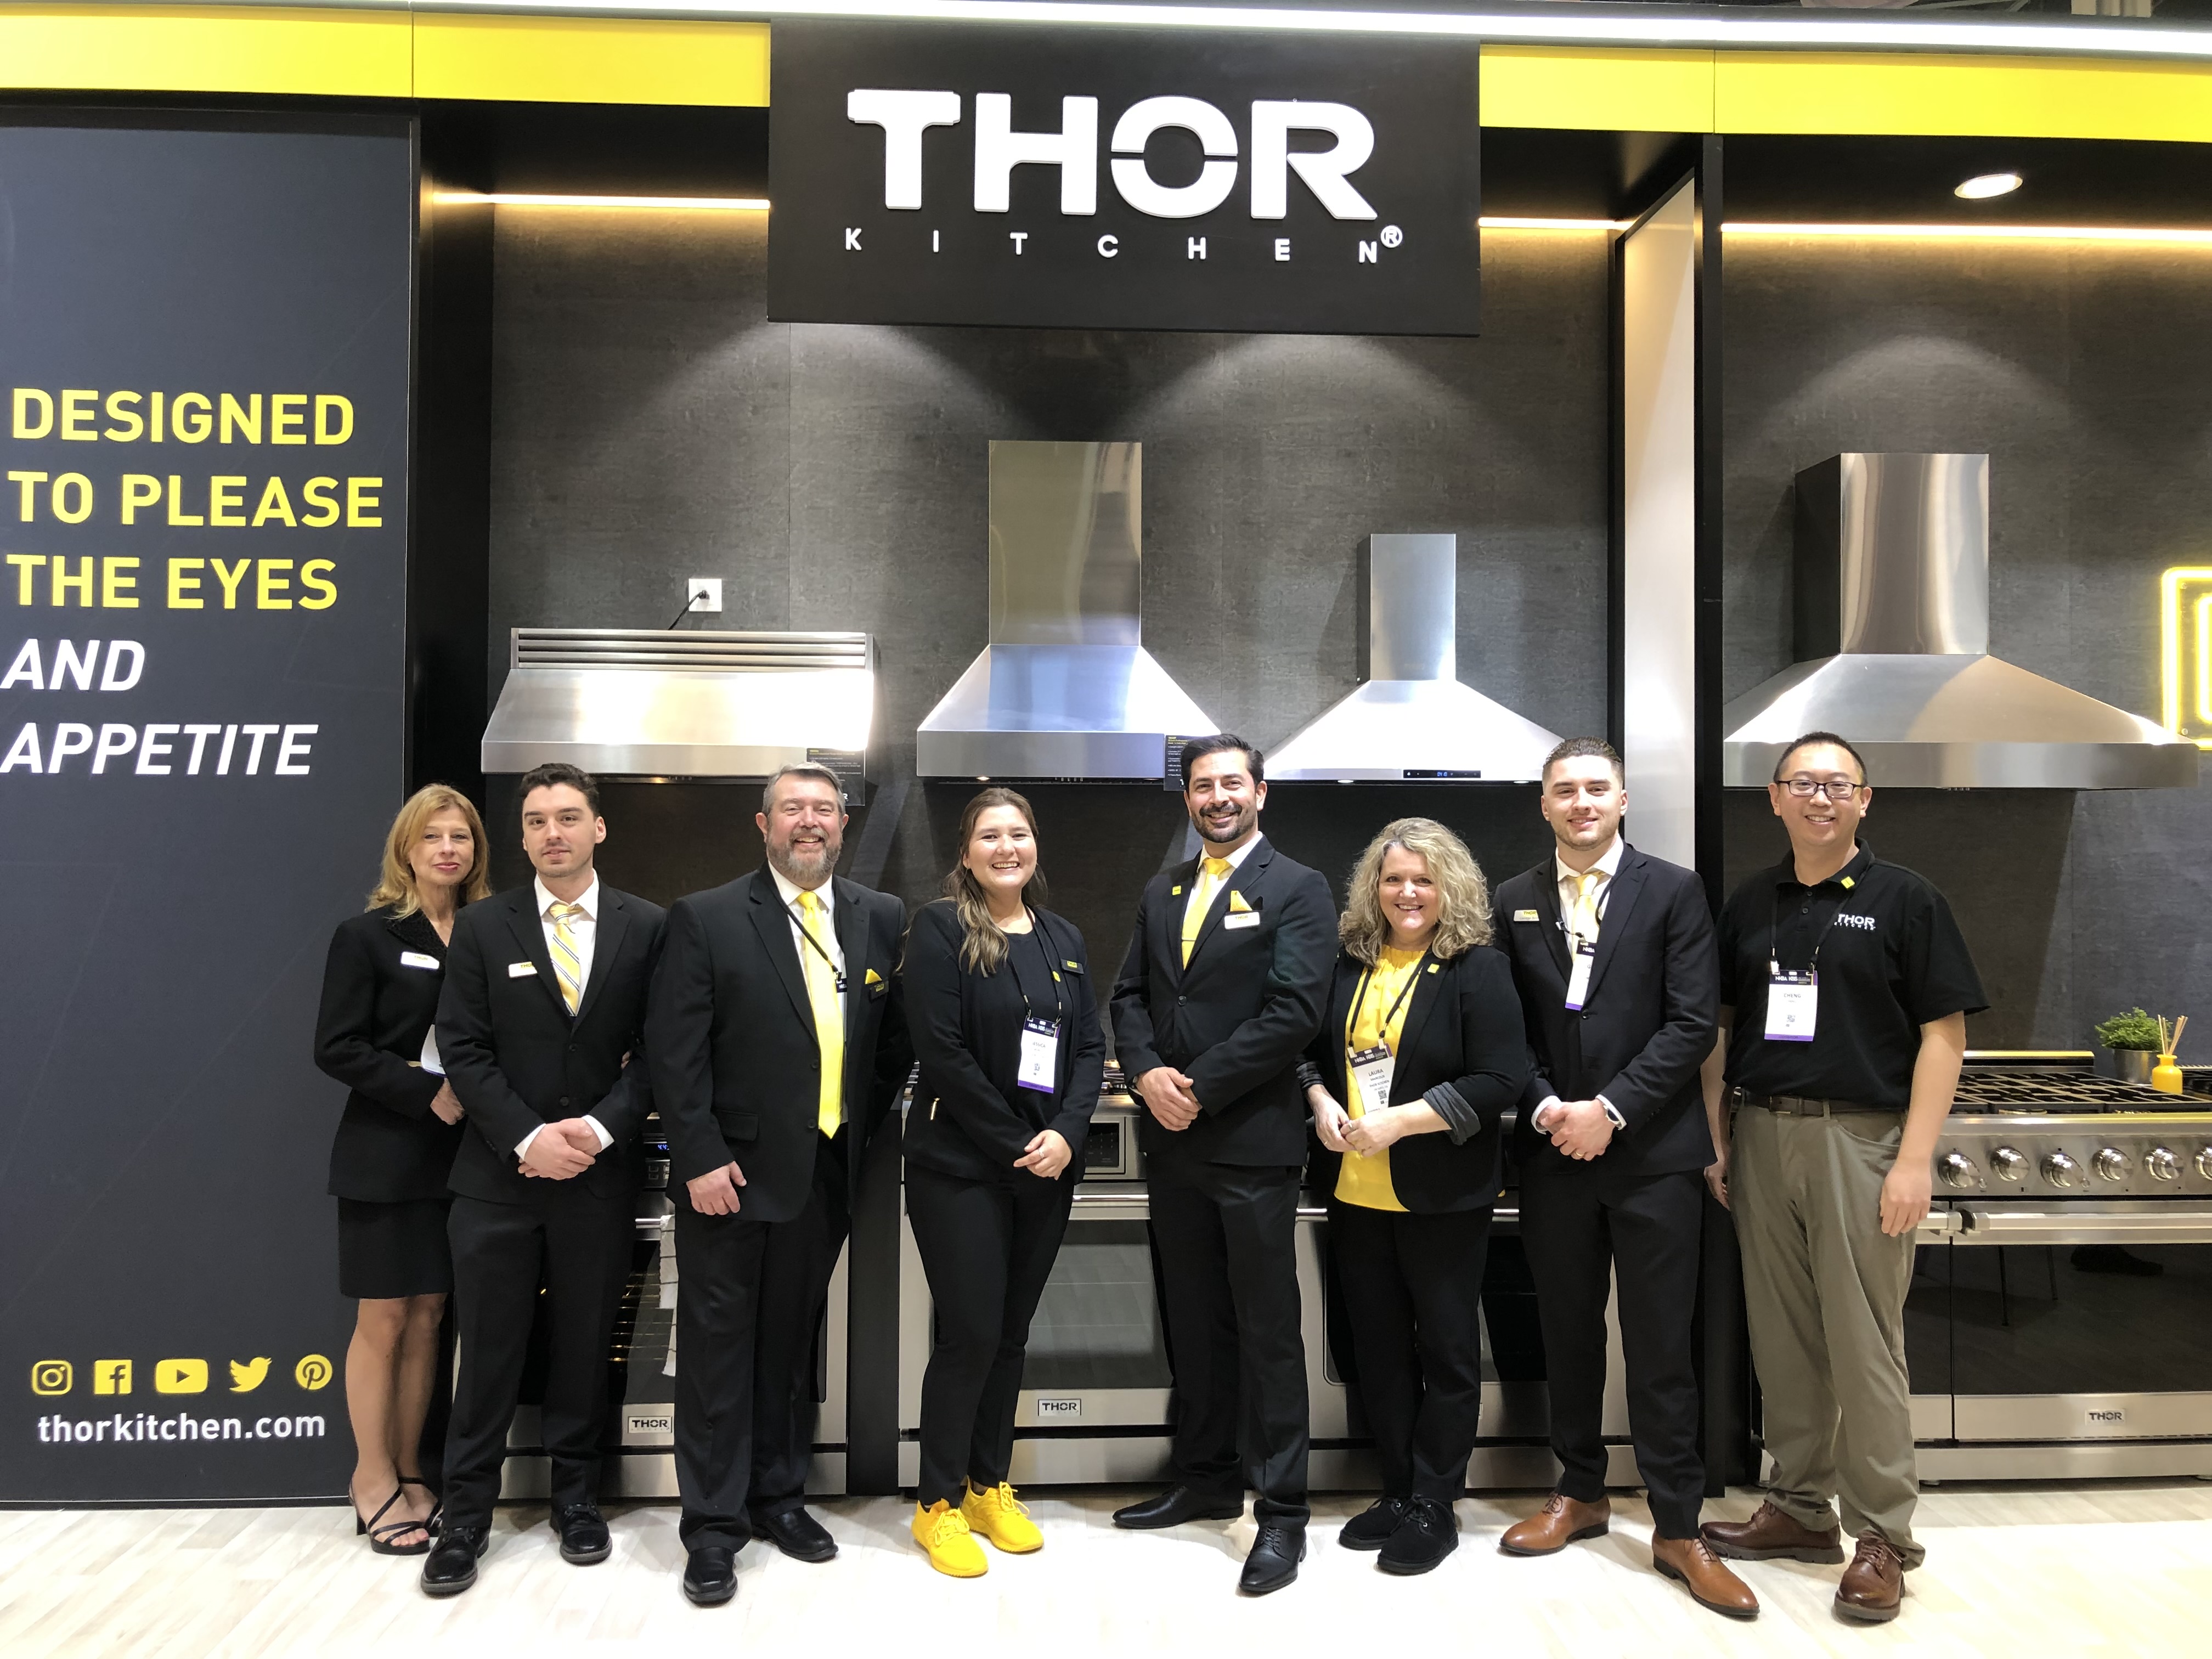 THOR Marketing Group supports the brand’s dealer base. From left to right: Karen Betz, Alphonse Betz, Dirk Leslie, Jessica Mundt, Anthony Arano, Laura Marcoux, George Betz, and Cheng Yang.